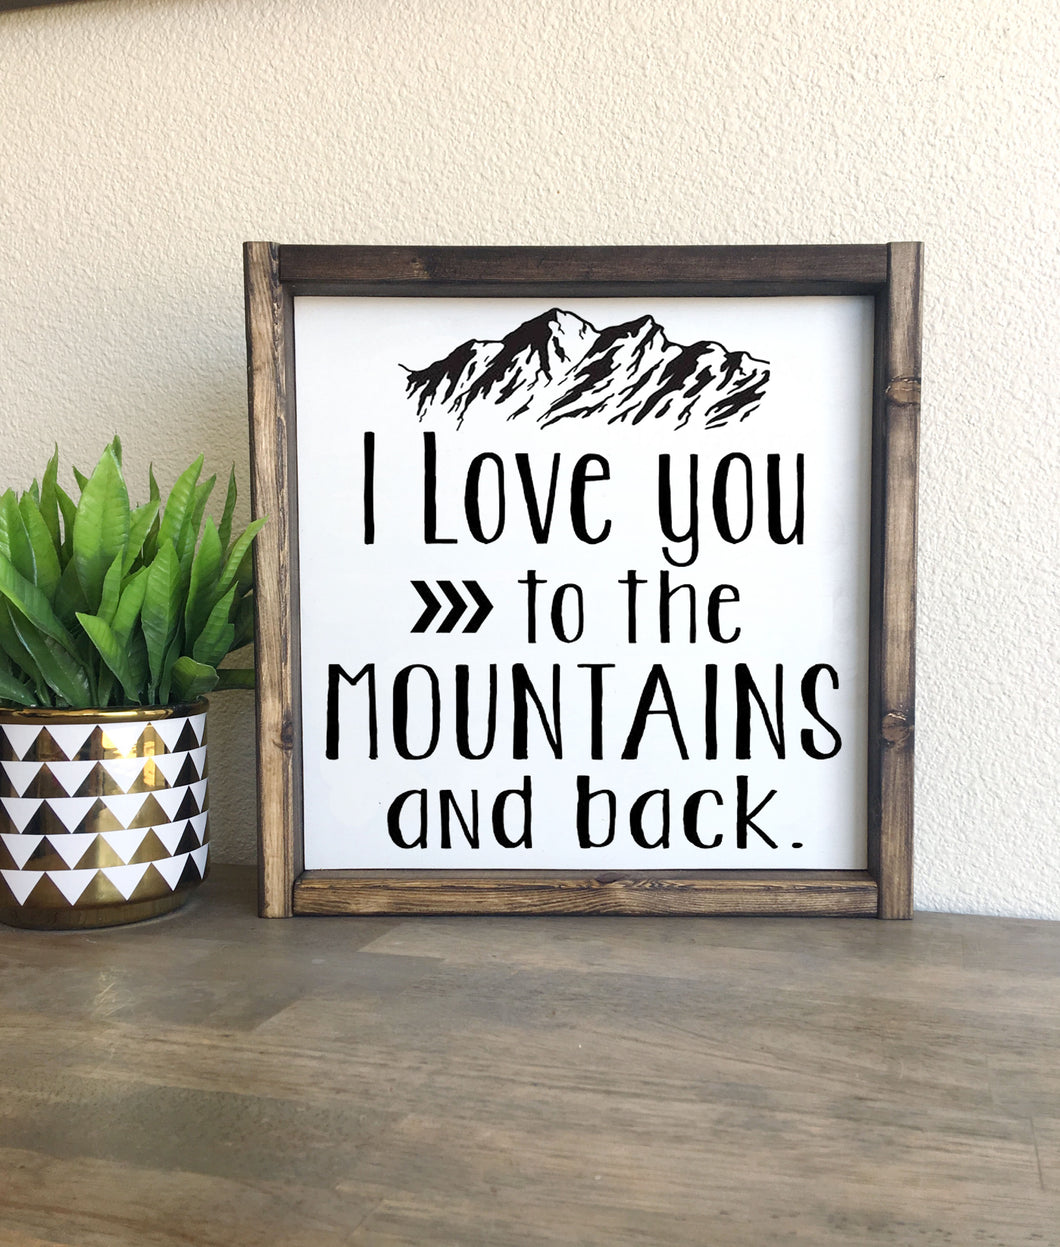 I love you to the mountains and back | Framed wood sign